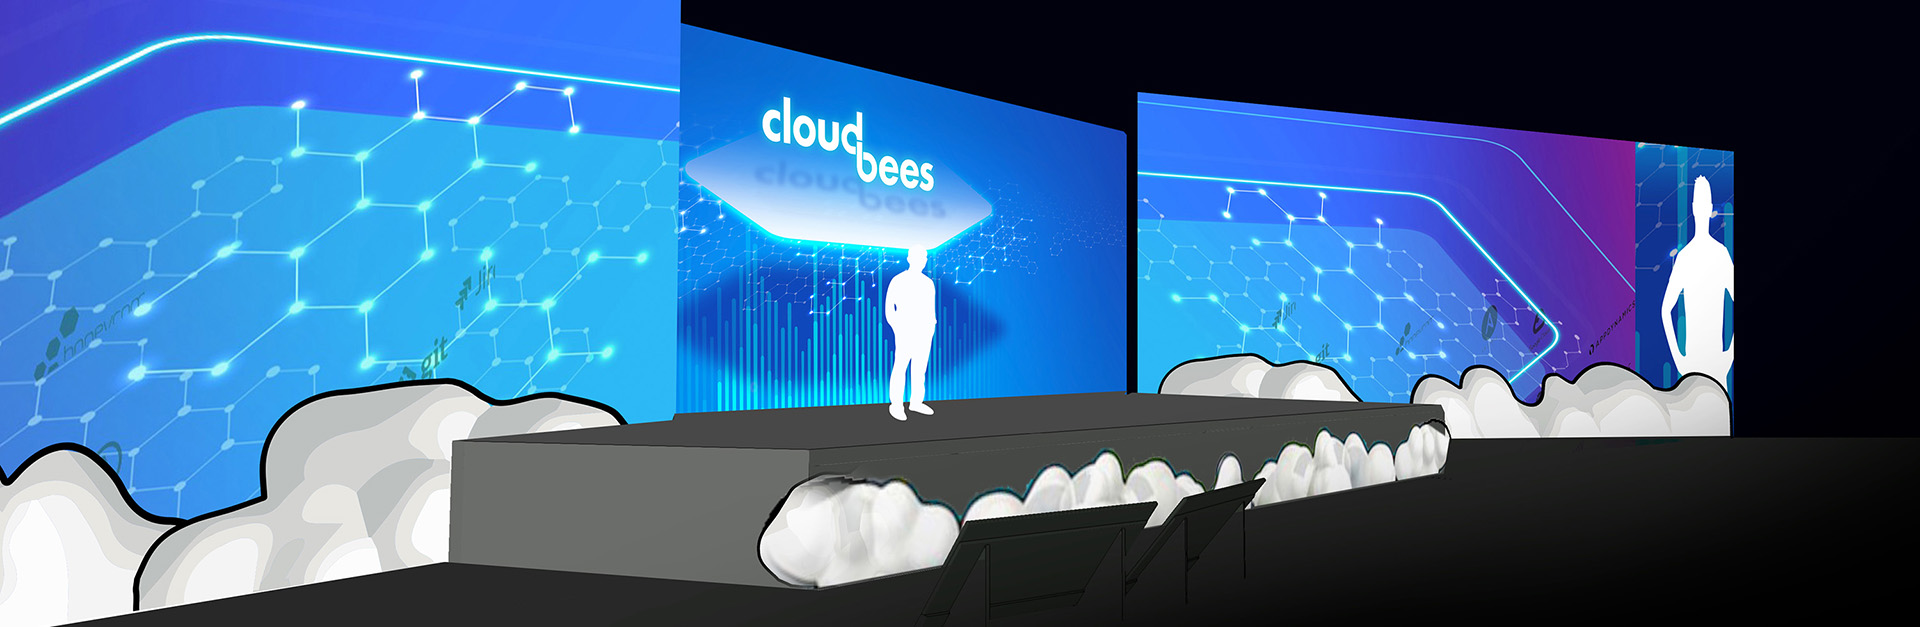 A stage mockup of the three screen set up from 2019 DevOps World Jenkins World event. It depicts the cloudbees platform.